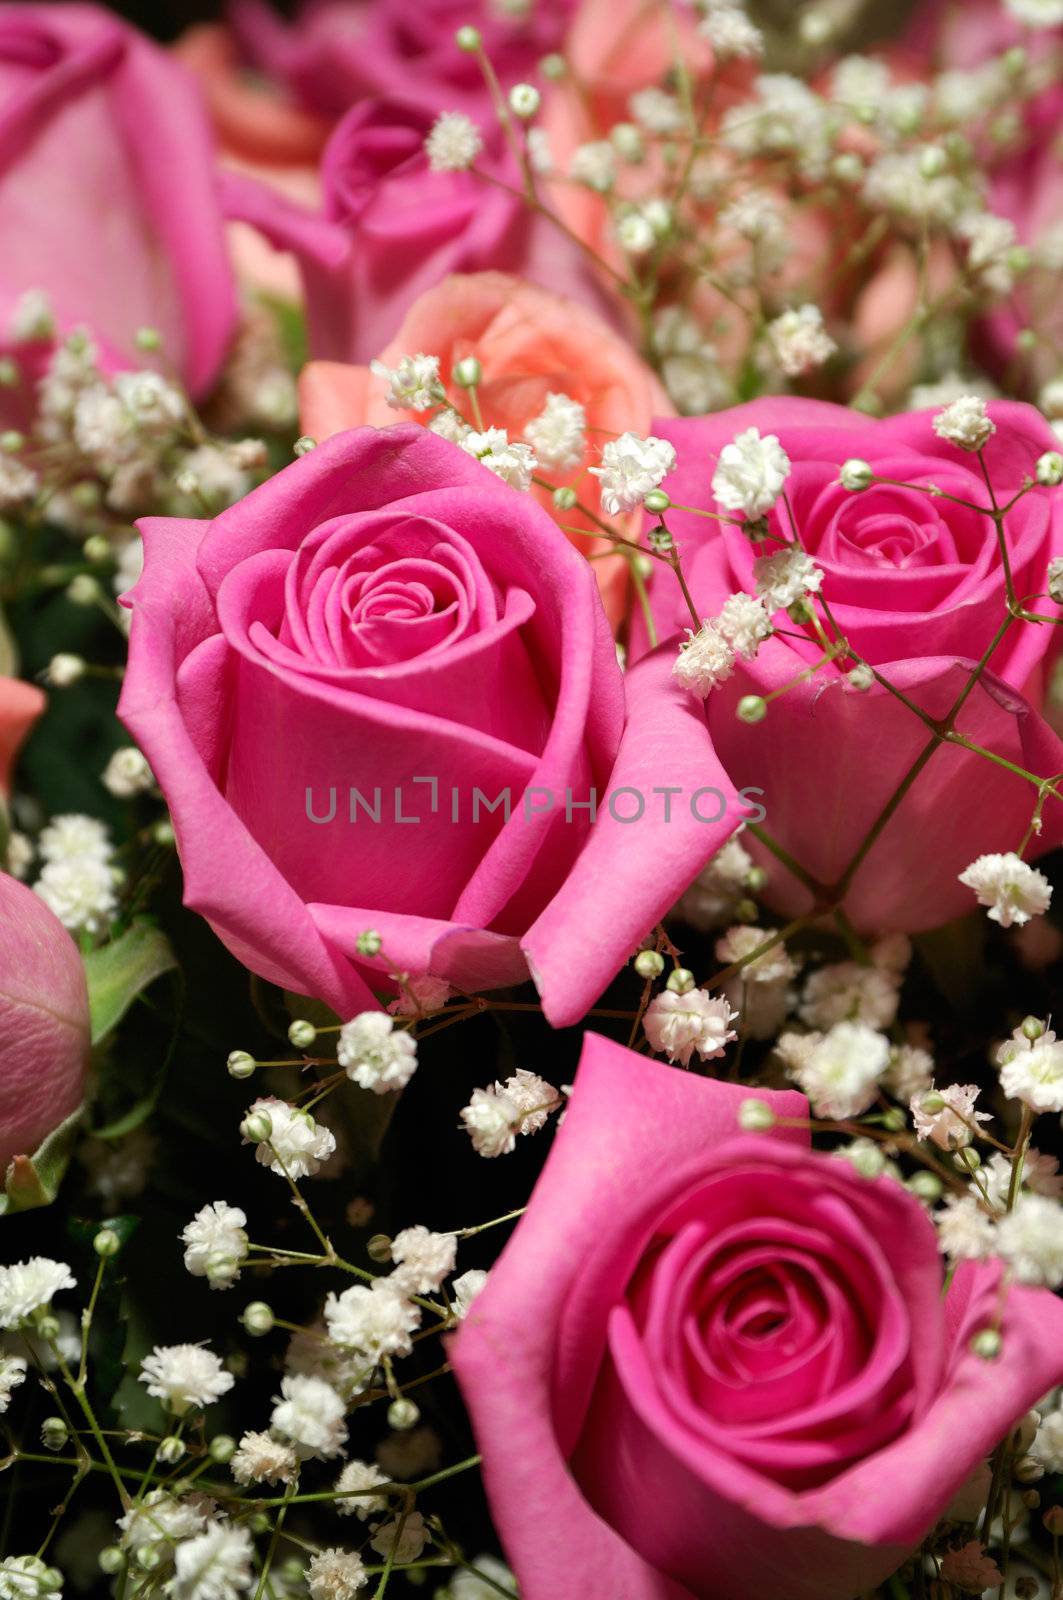 Image shows a bouquet of roses, mostly pink, decorated with small white flowers